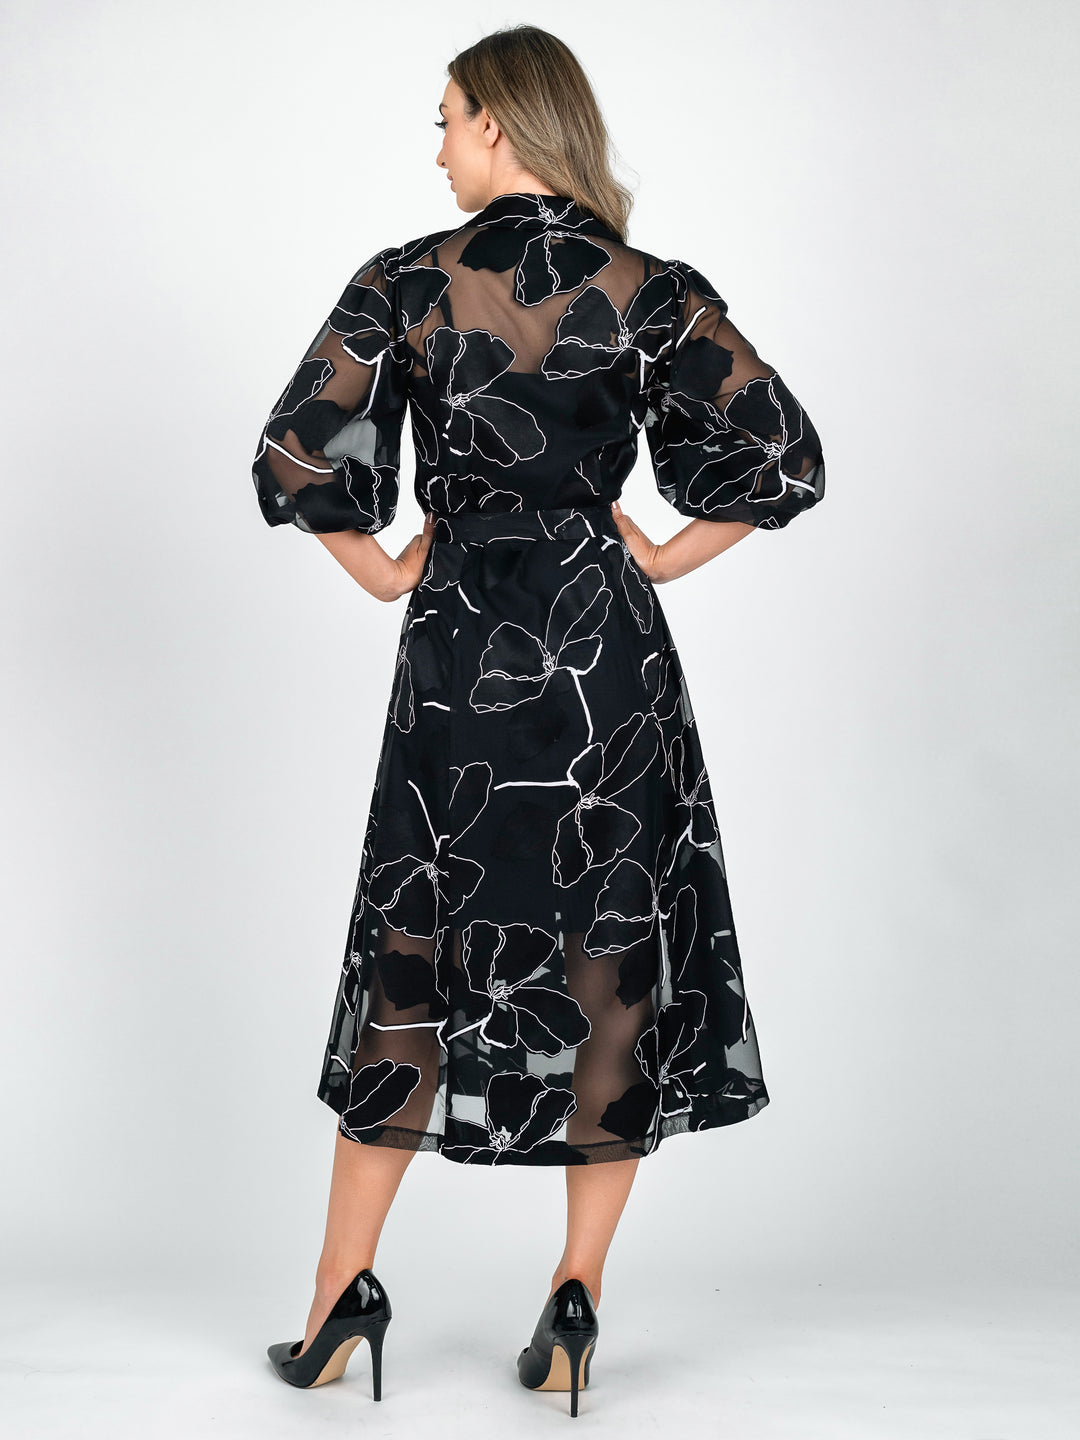 Black and white floral a-line women's shirt dress with 3/4 blouson sleeves